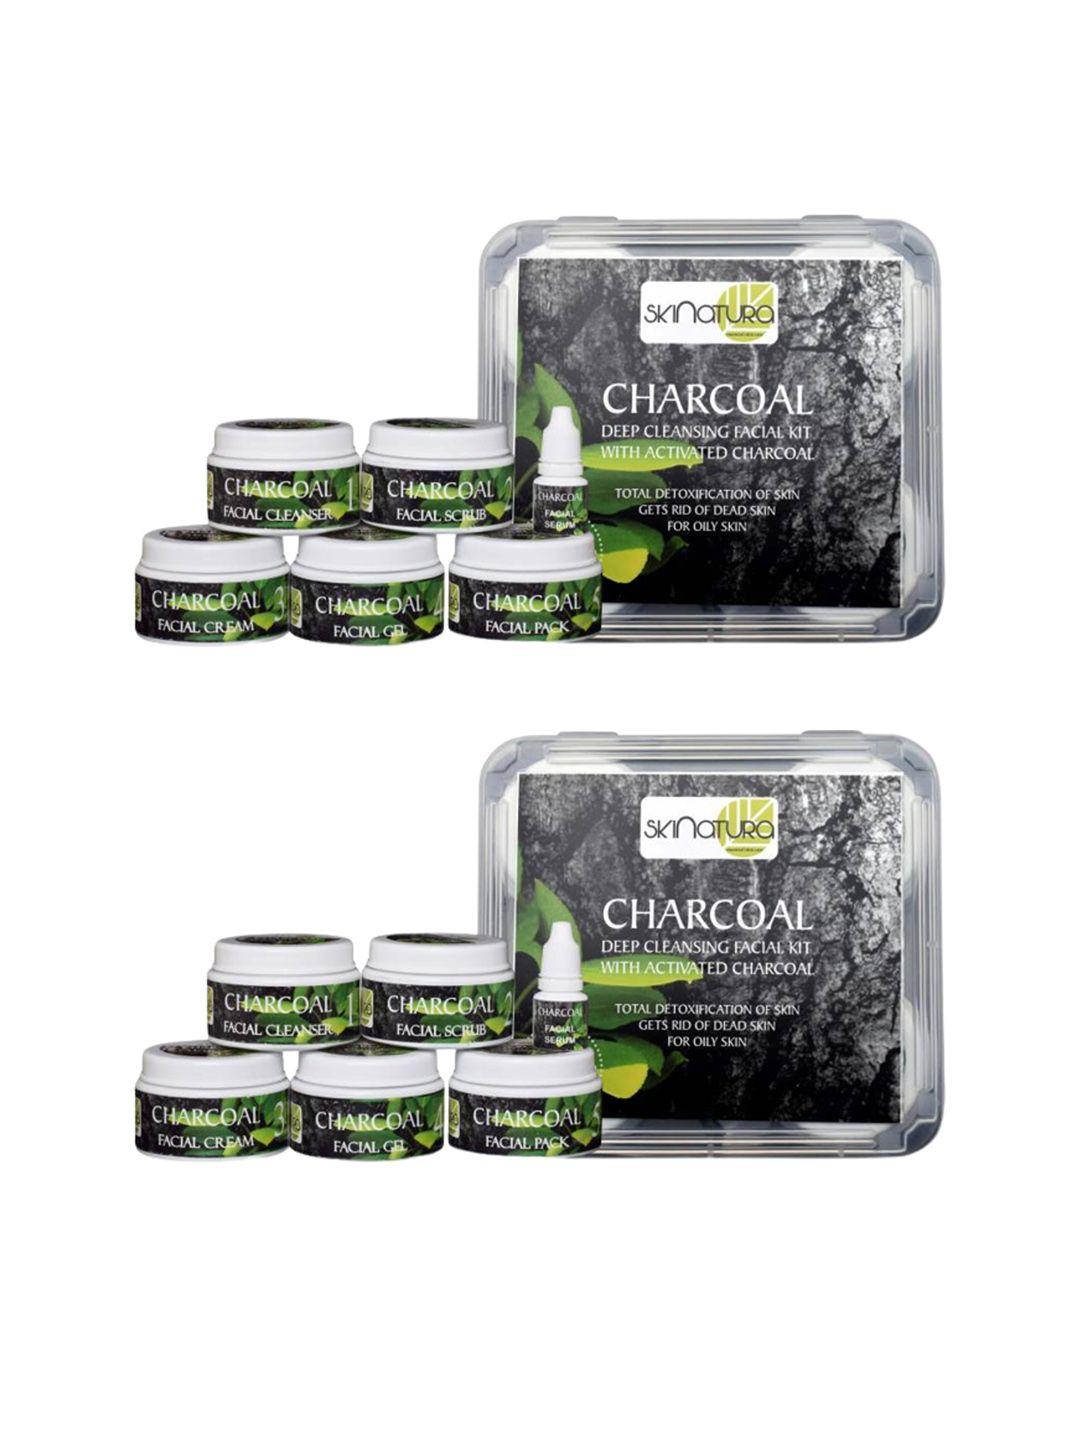 skinatura adults set of 2 charcoal deep cleansing professional facial kit 620gm